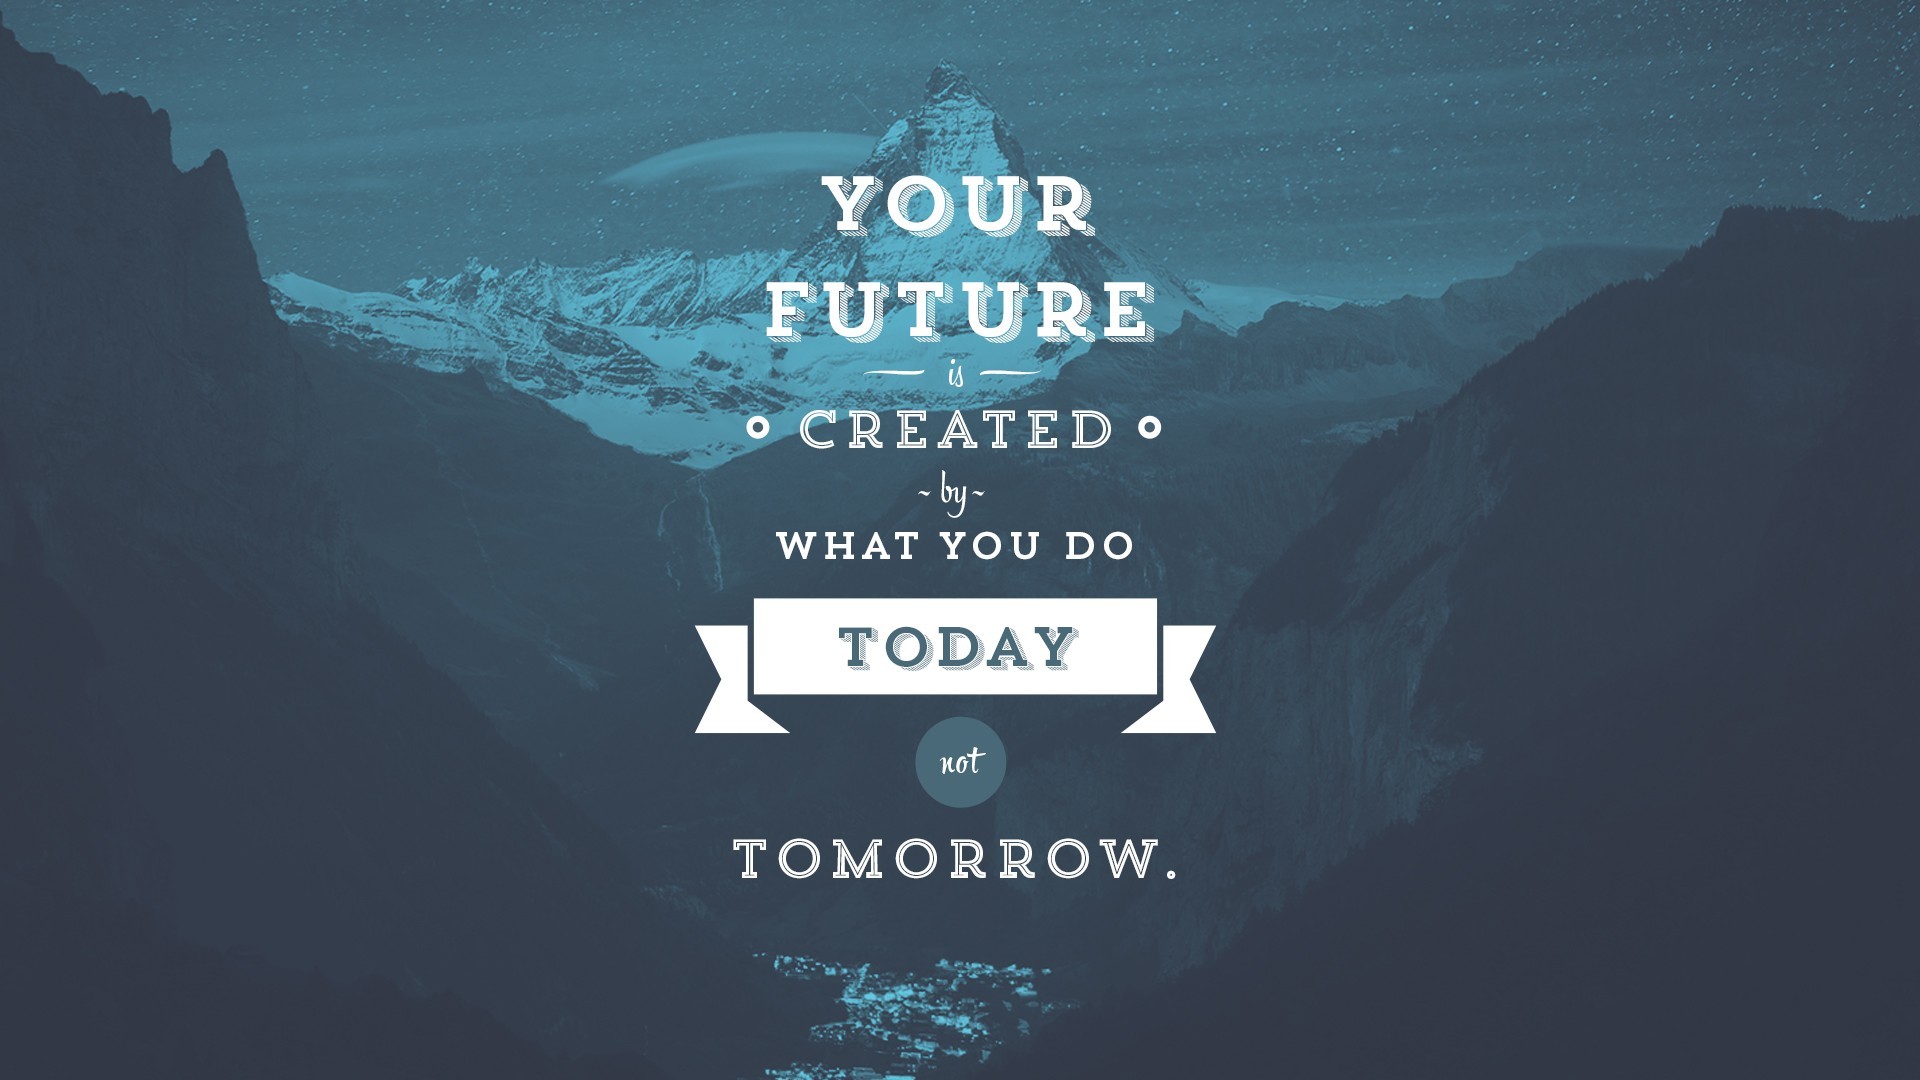 1920x1080 Your future is created by what you do today not tomorrow. 35 Inspirational  Typography HD Wallpapers for Desktop, iPhone and Android